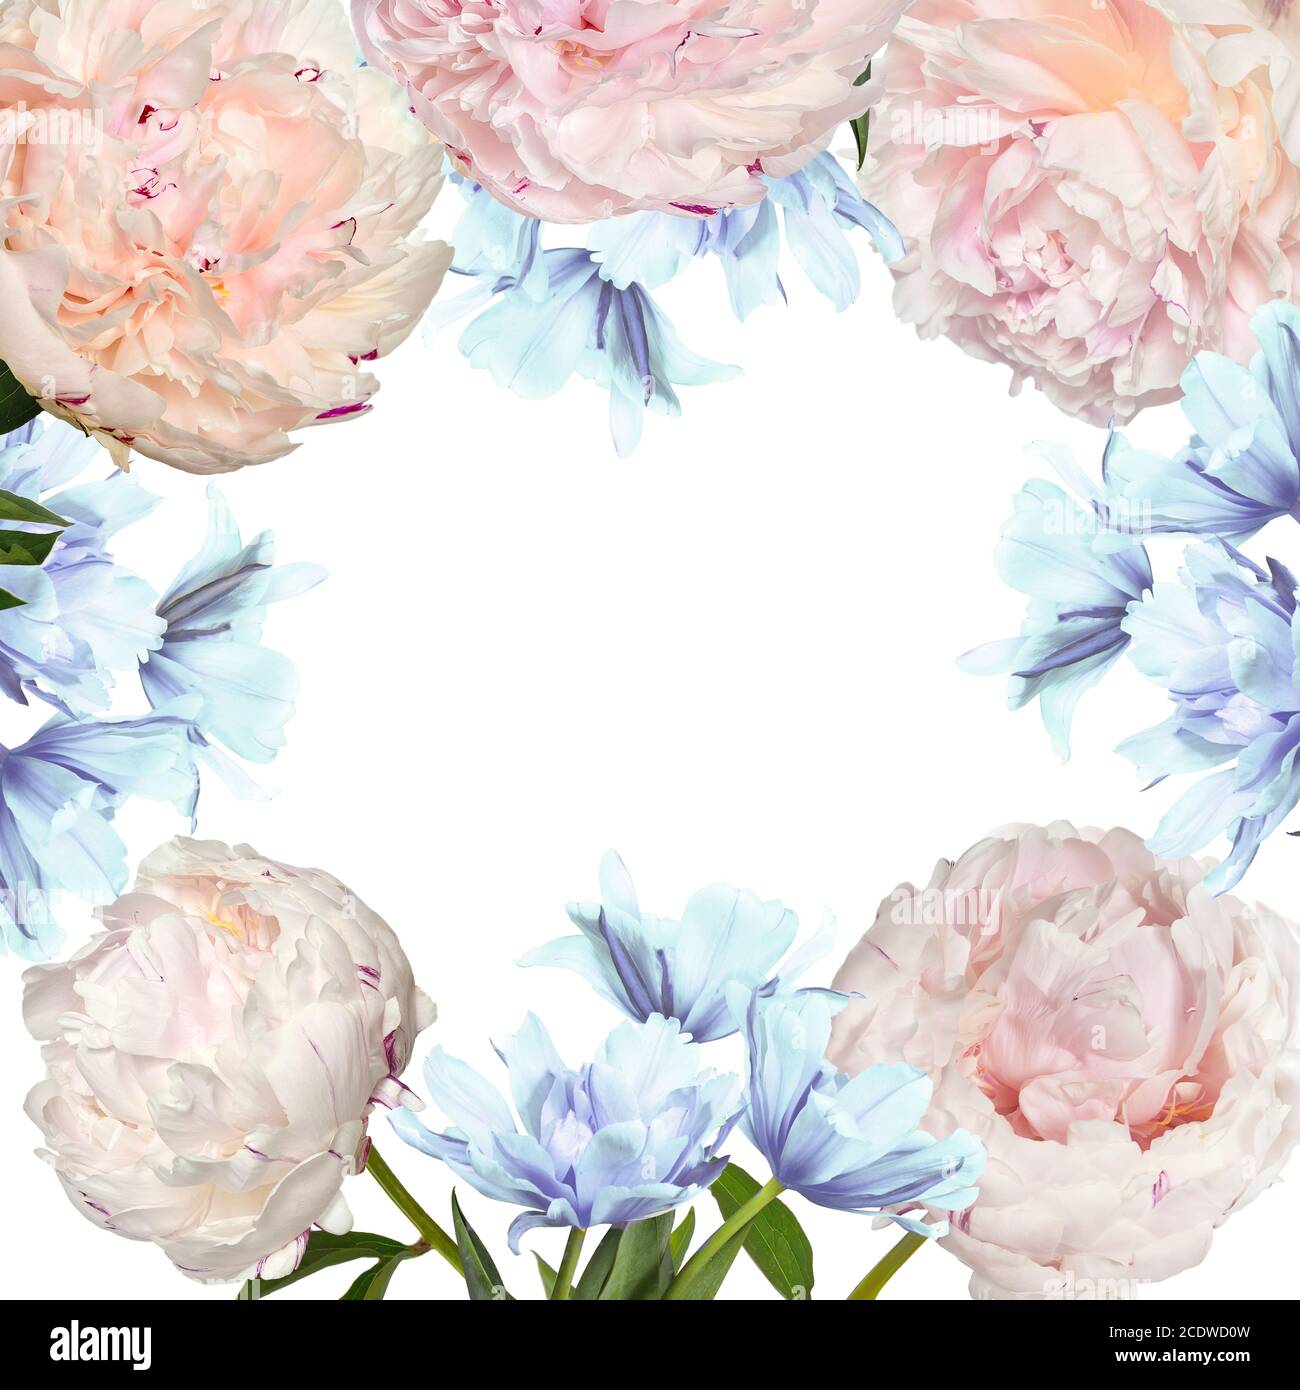 Beautiful floral frame with pink peonies and blue tulip flowers on a white background Stock Photo